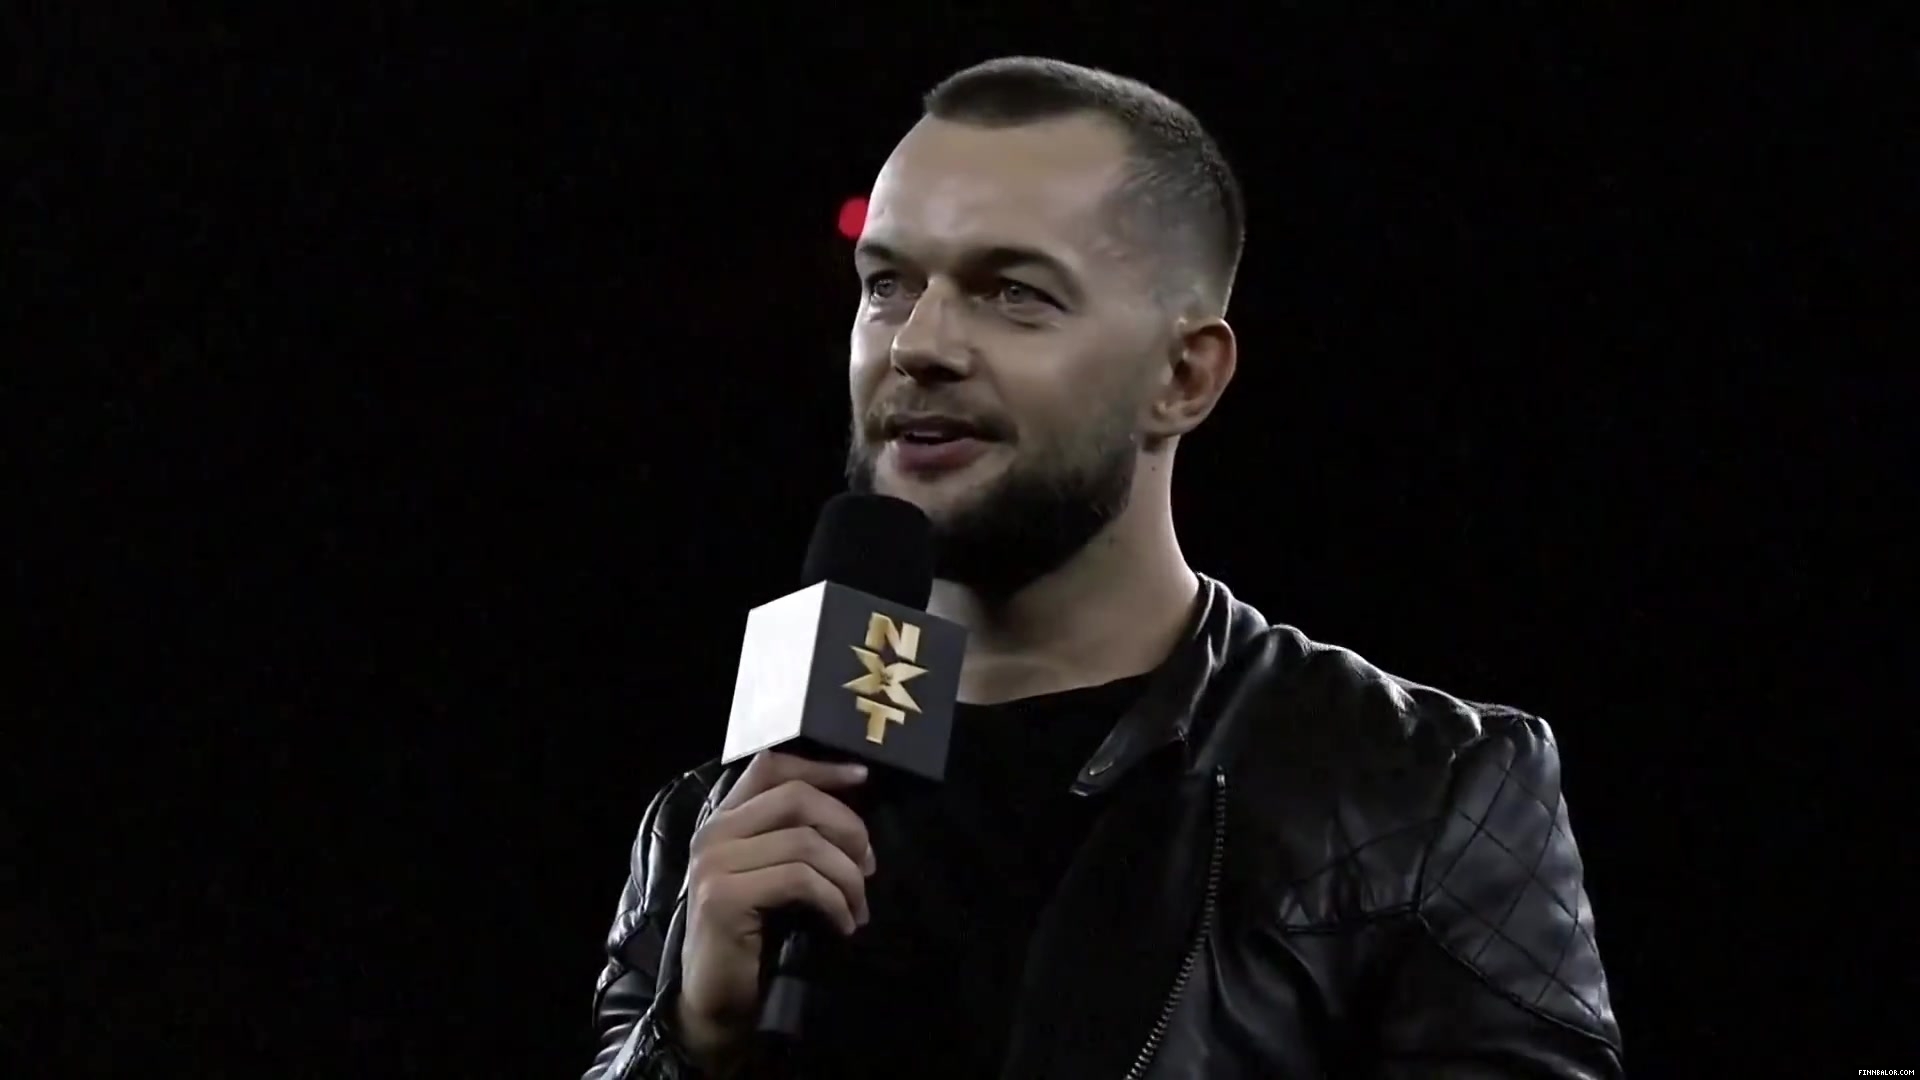 Finn_Balor___The_Rising_of_the_Prince_in_NXT_151.jpg